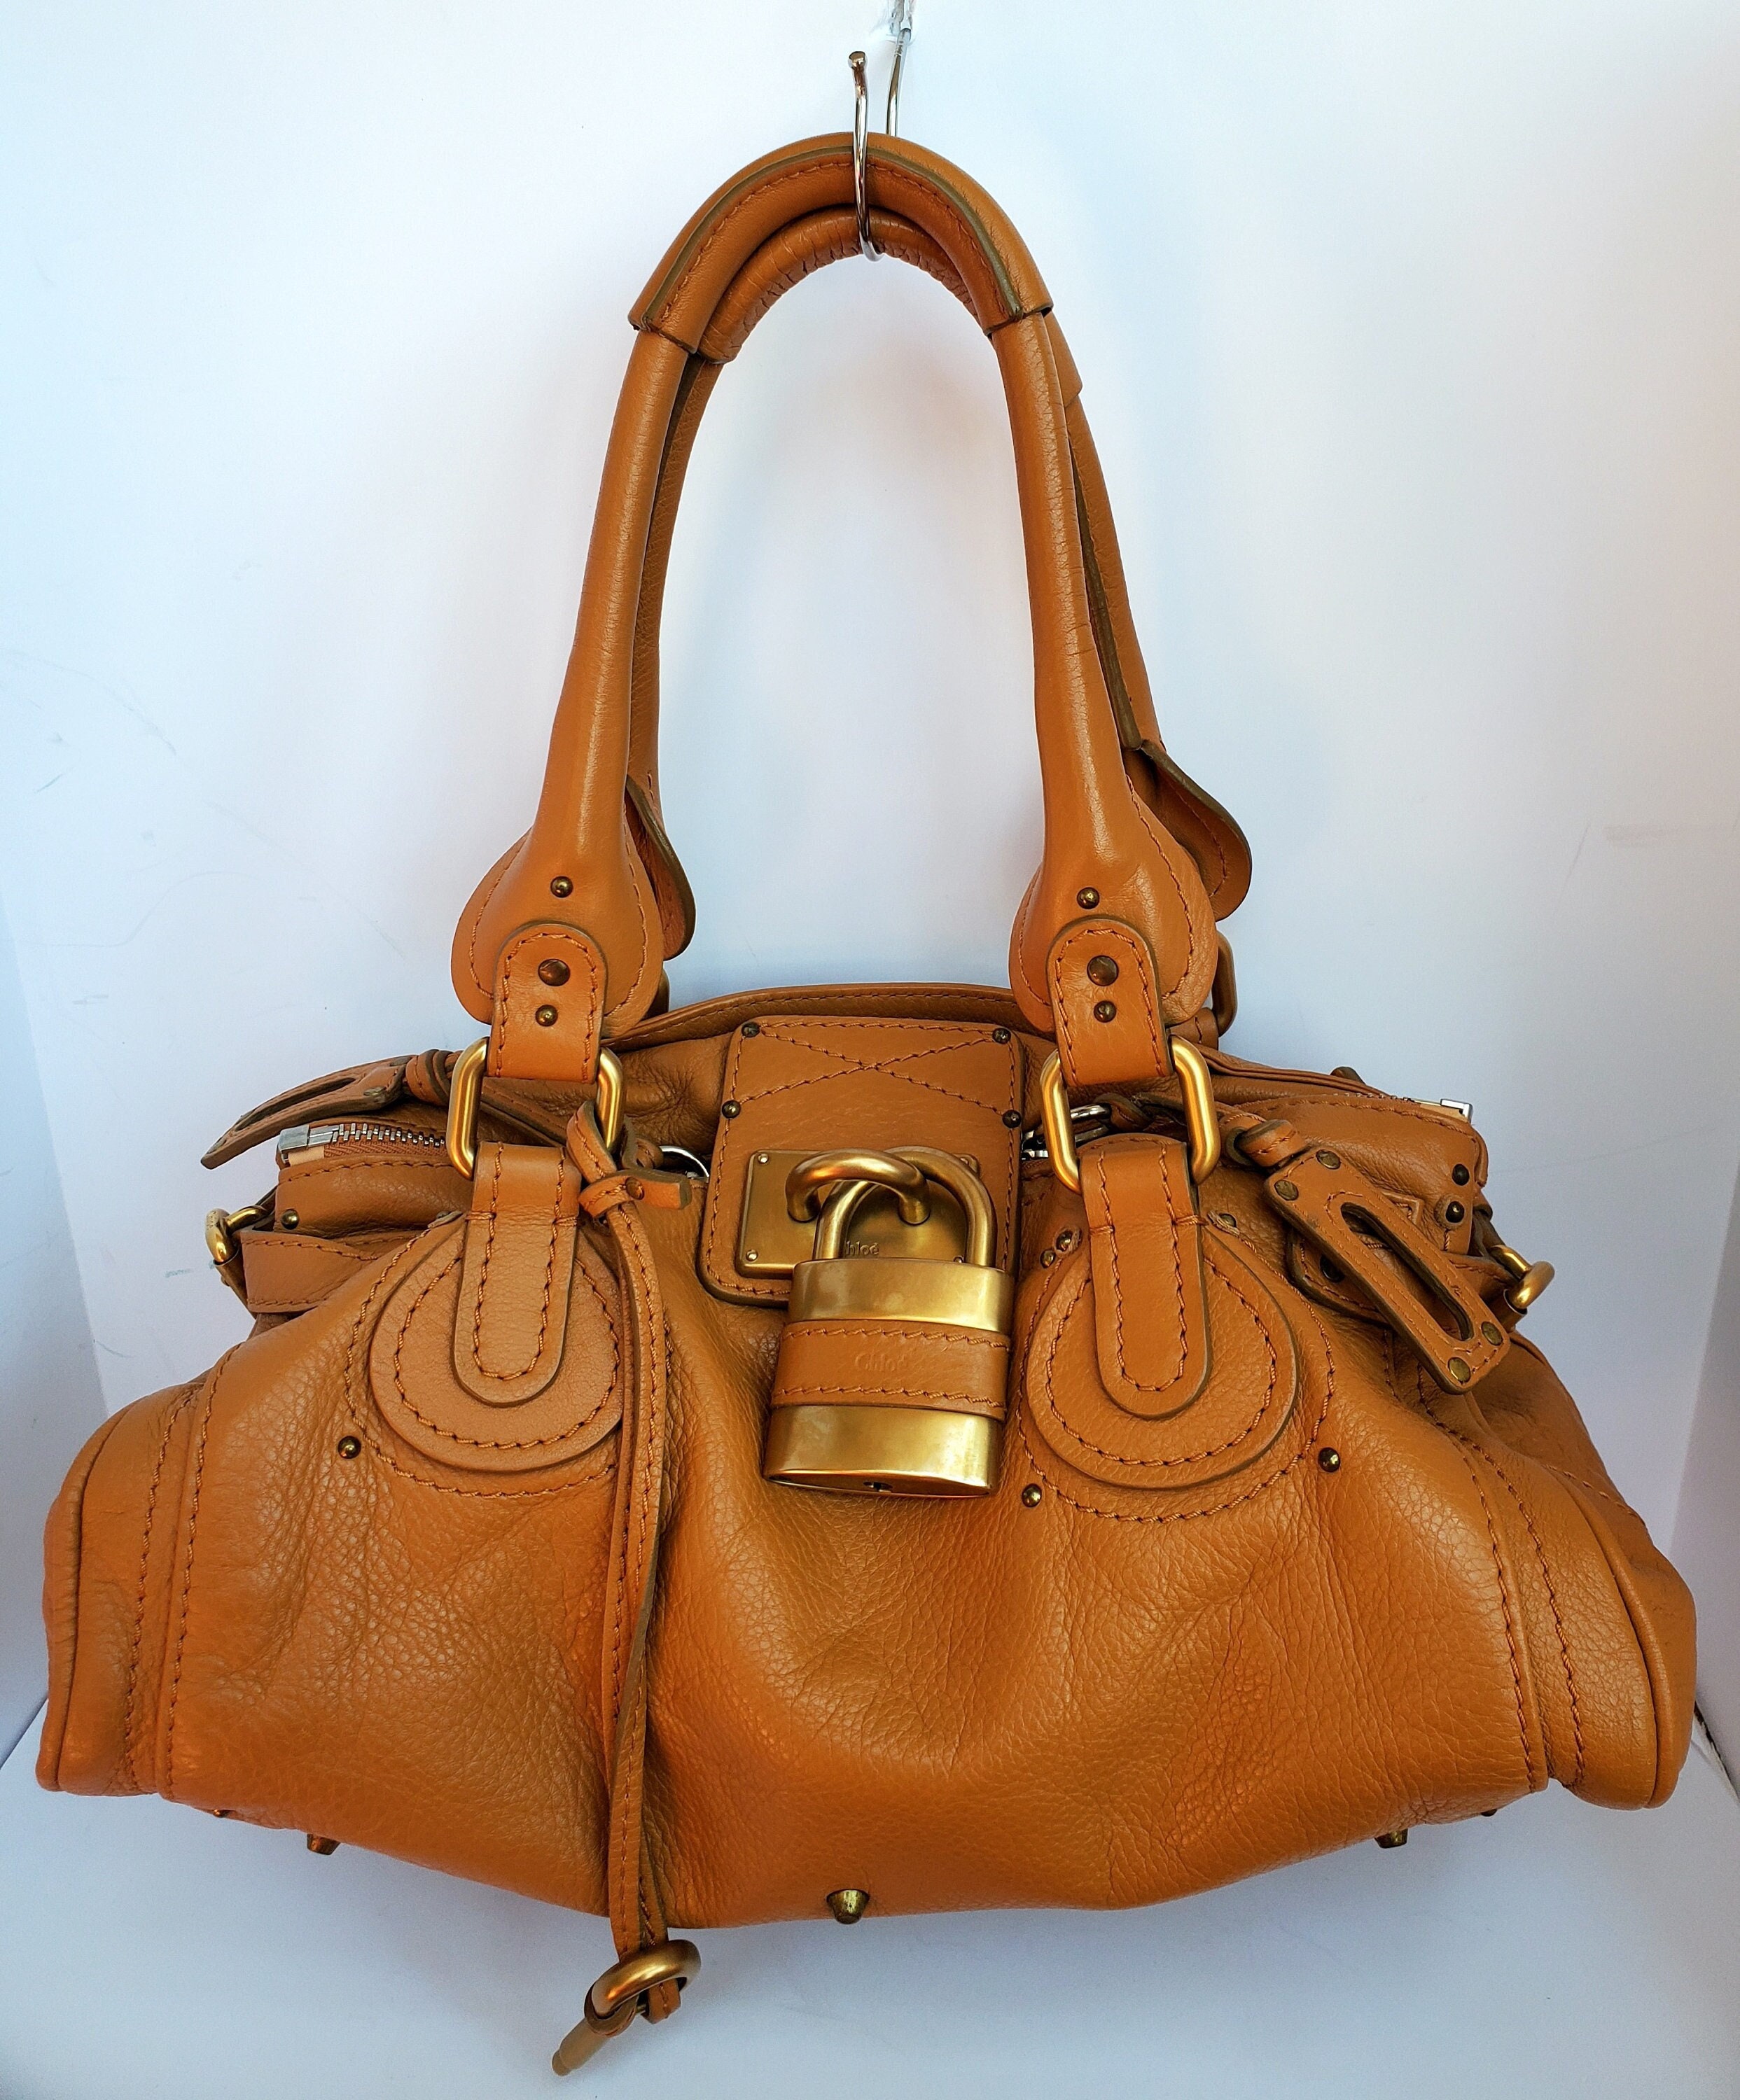 Chloé Chloe Small Rubberized Shoulder Bag Nile Leather 2way Brown